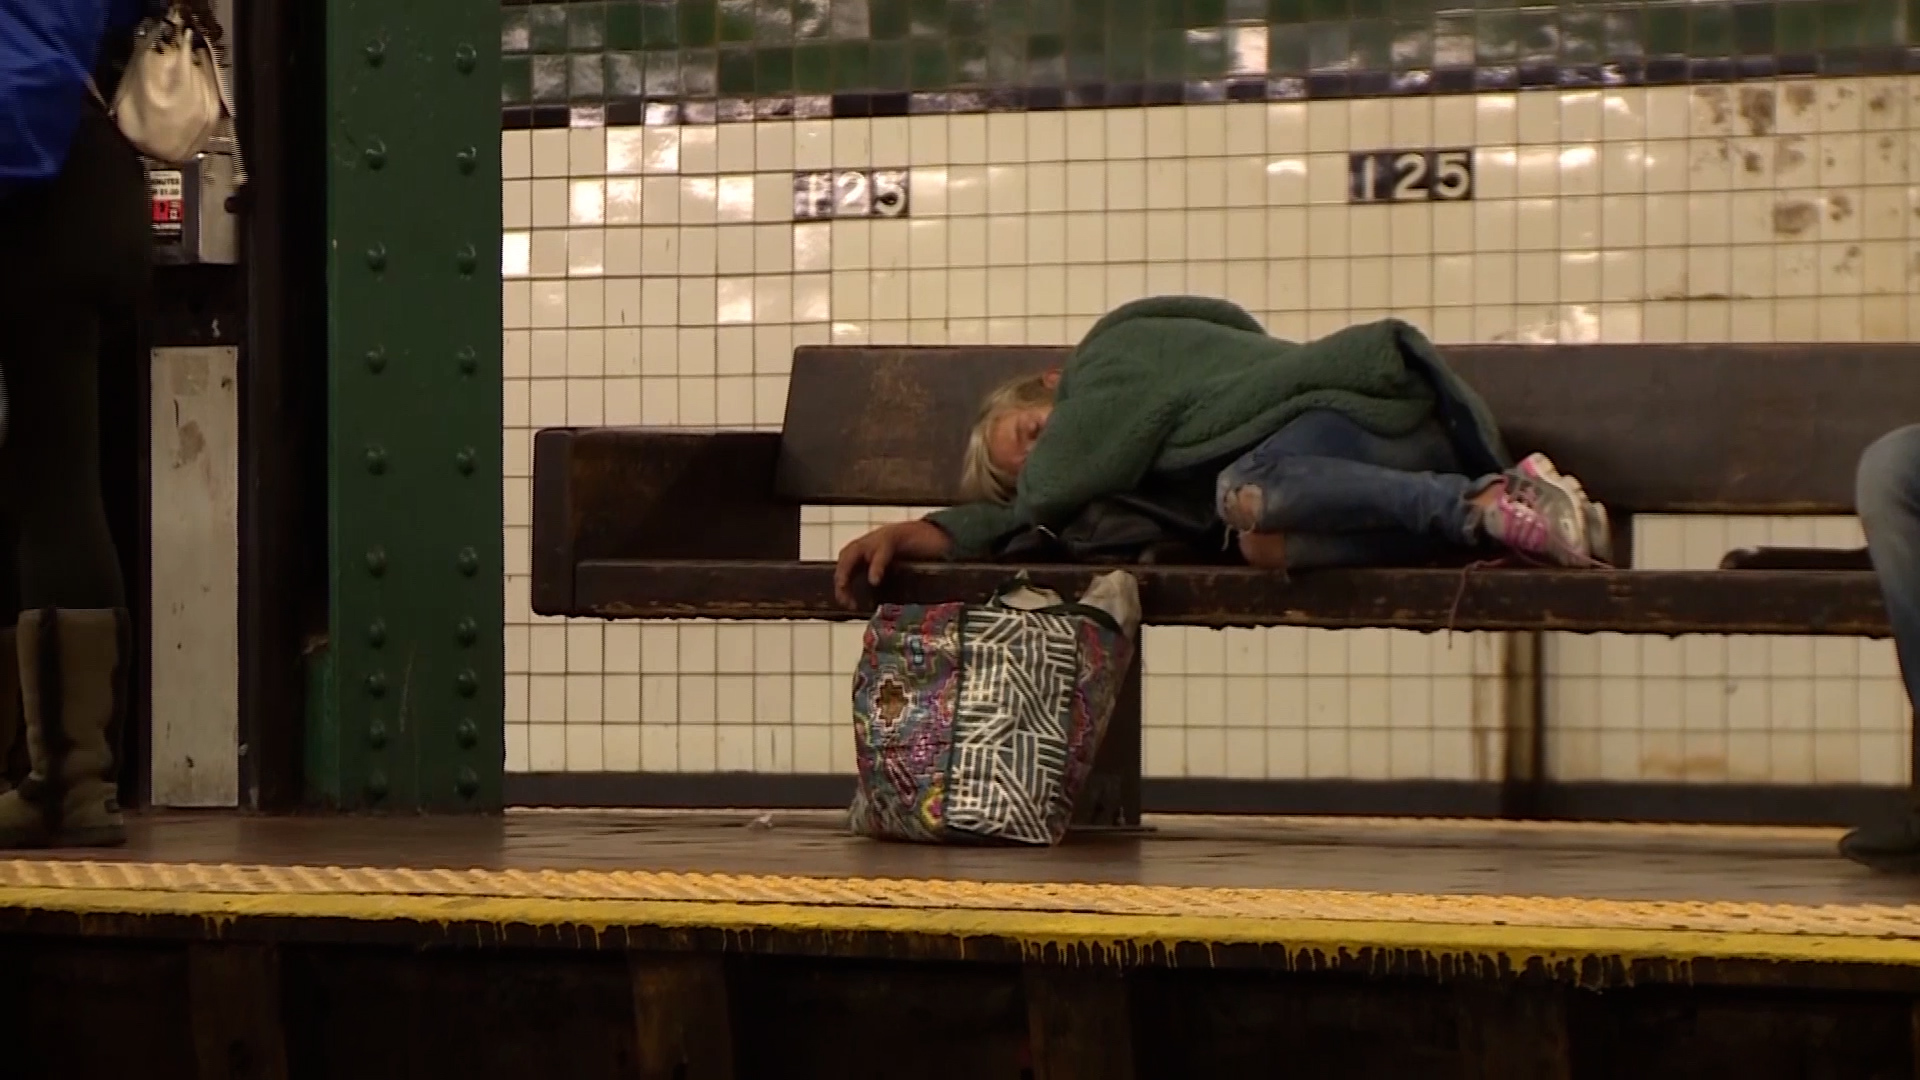 Homelessness surges in New York City